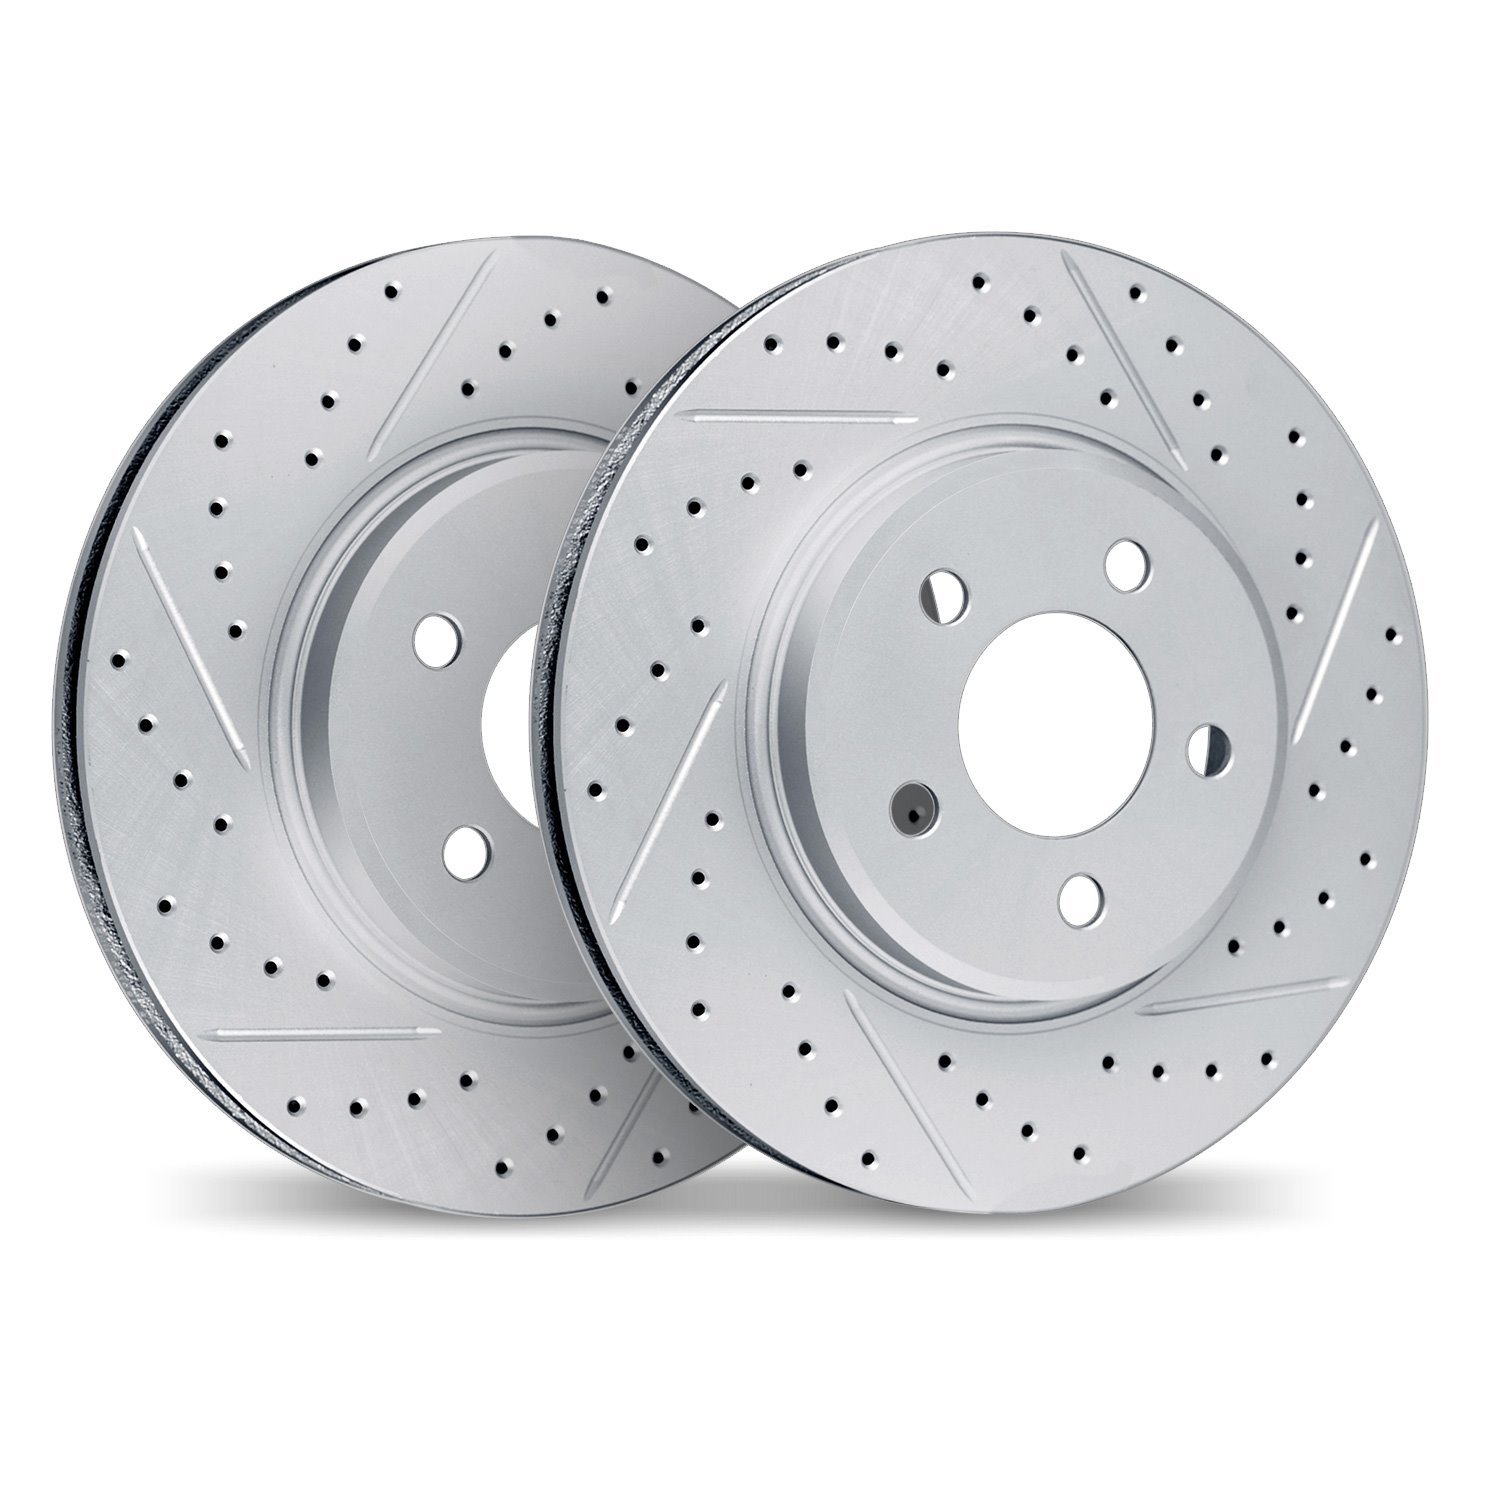 2002-54045 Geoperformance Drilled/Slotted Brake Rotors, 2006-2010 Ford/Lincoln/Mercury/Mazda, Position: Front